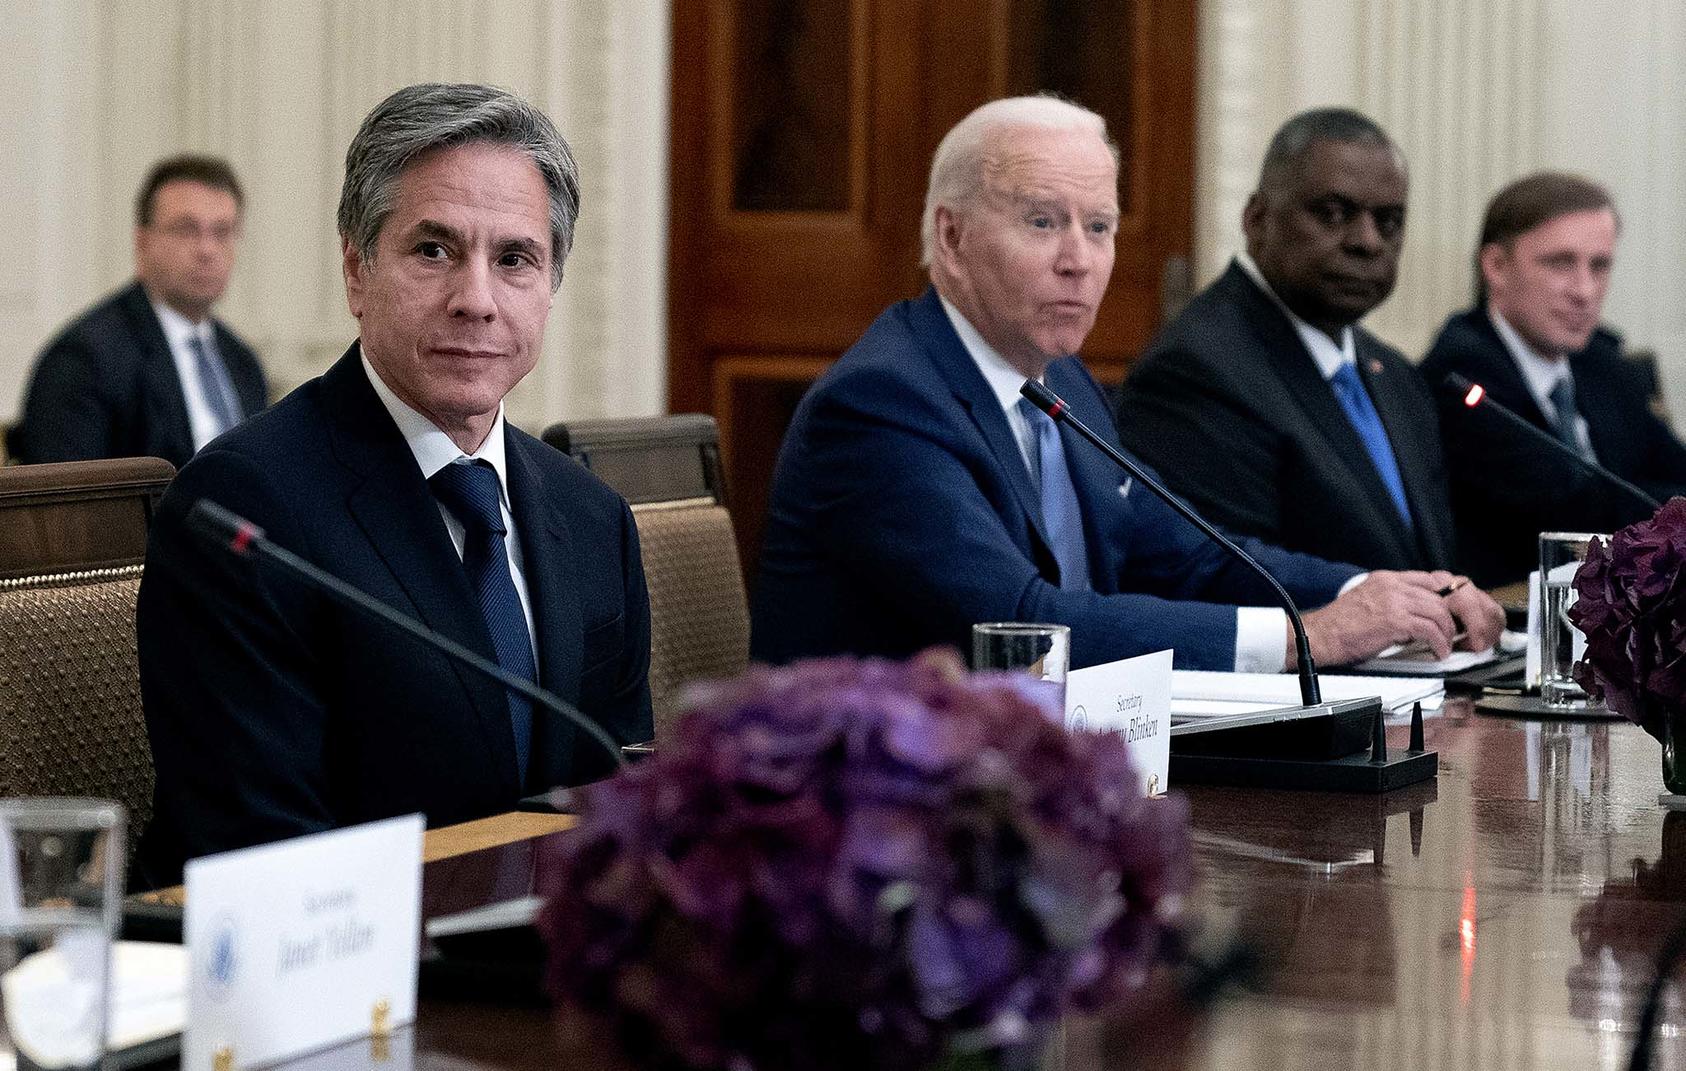 Secretary of State Antony Blinken, left, joins President Joe Biden and other administration officials in a meeting at the White House on the latest round of violence between the Israelis and Palestinians, May 21, 2021. (Stefani Reynolds/The New York Times)